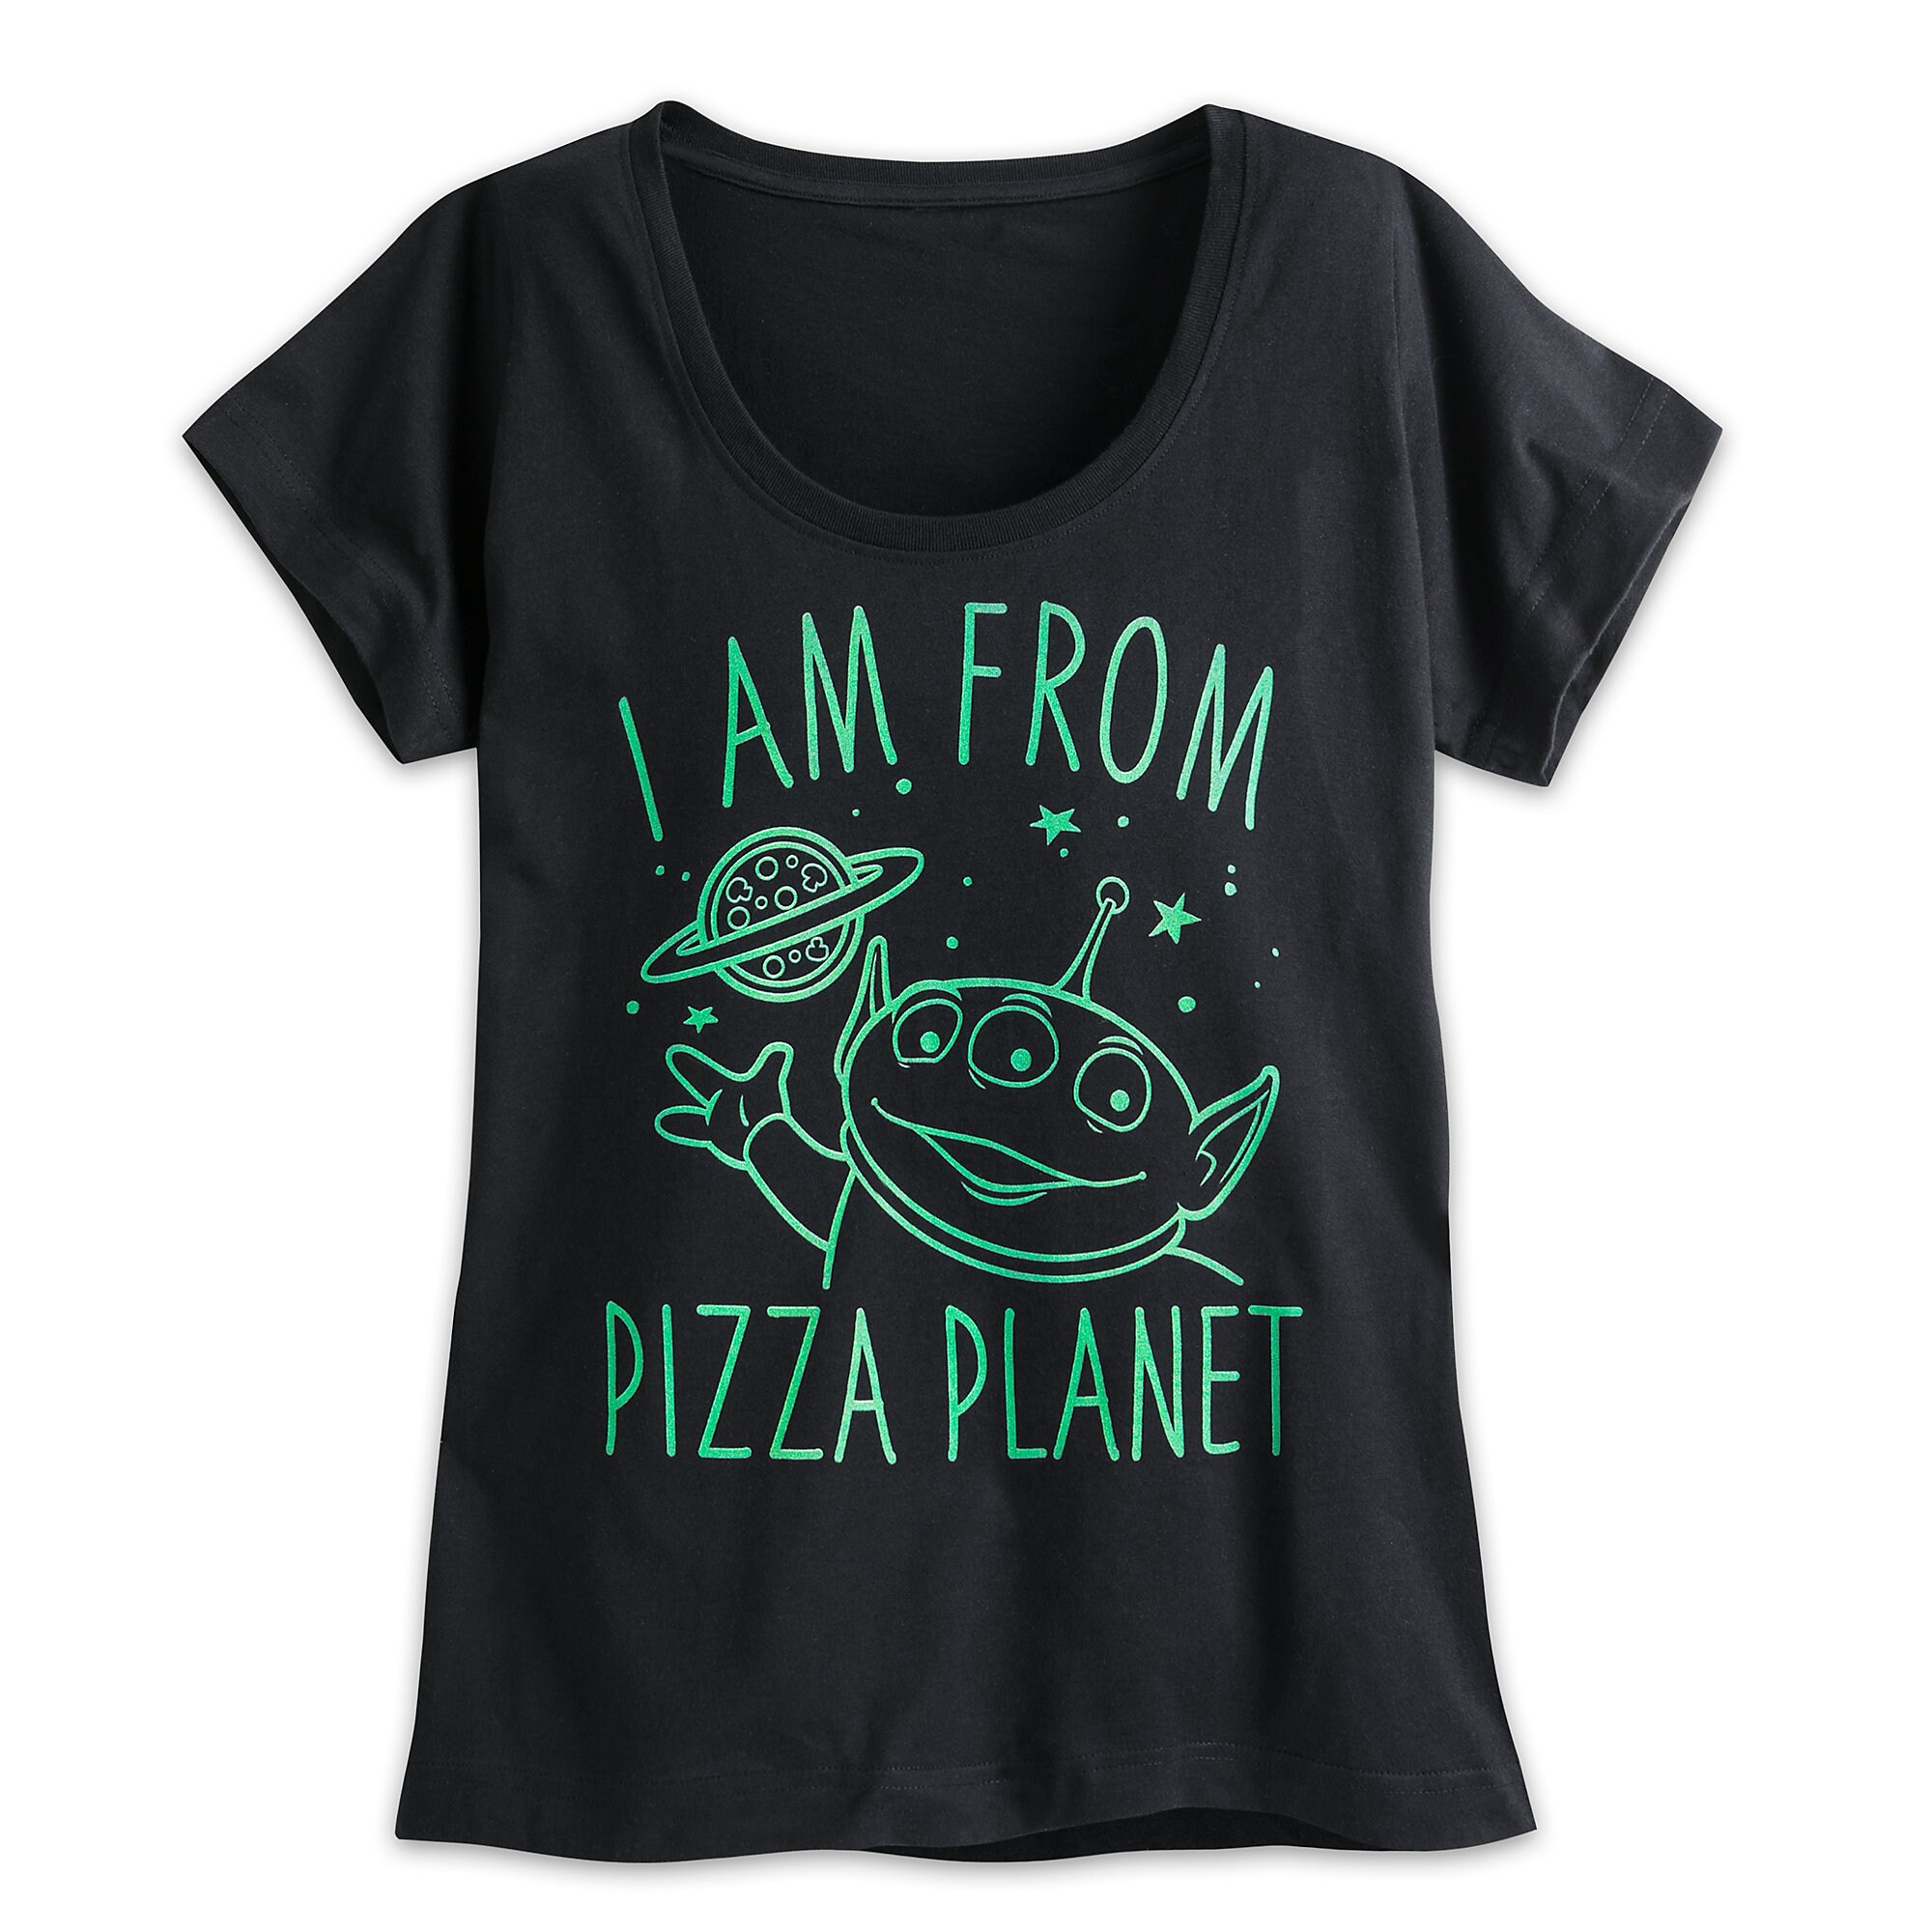 Alien Pizza Planet Tee for Women - Toy Story